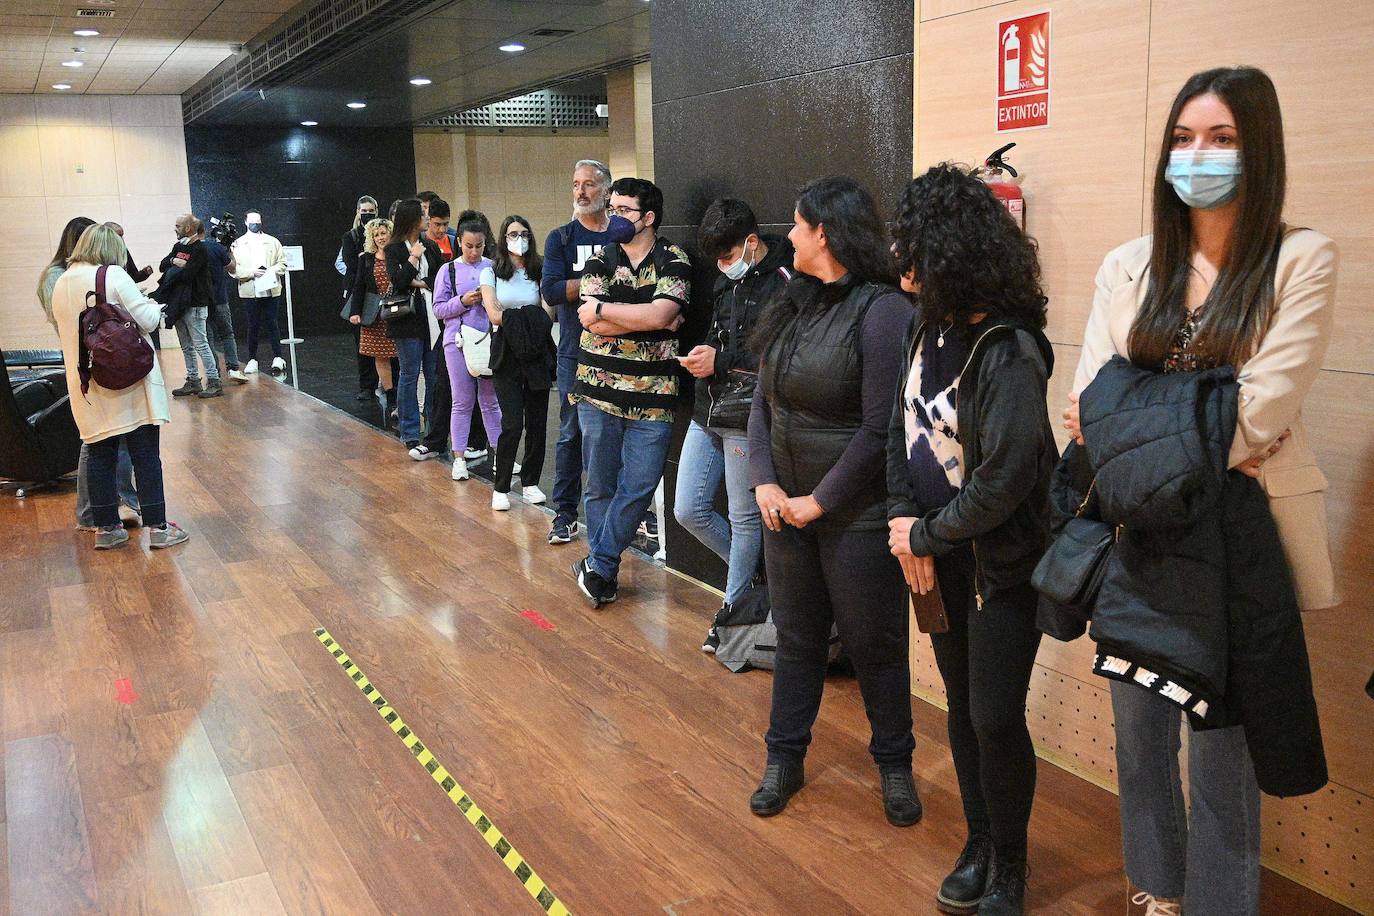 Applicants wait in line to be interviewd for a job at Starlite. /JOSELE